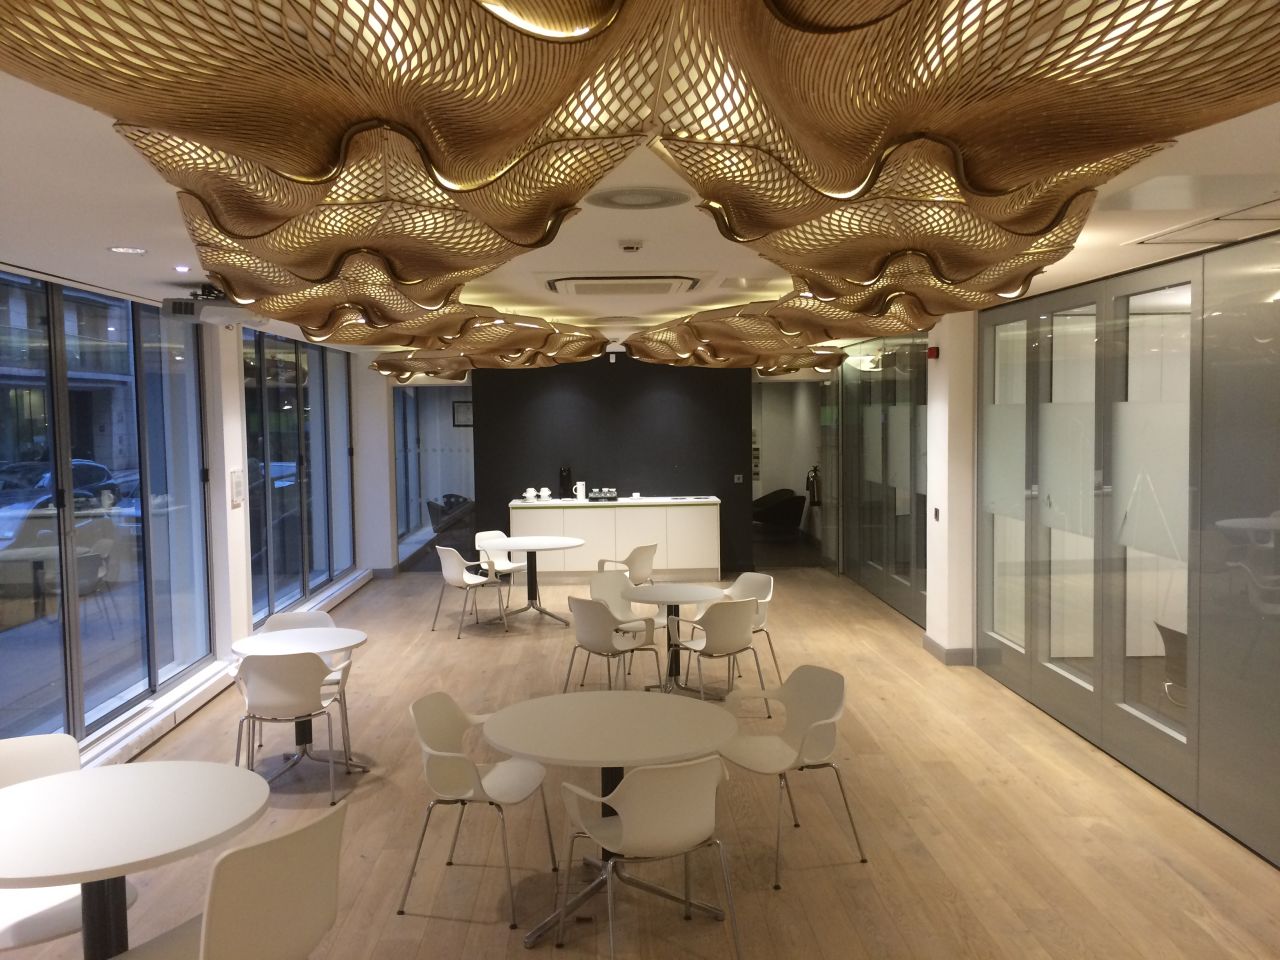 The Wooden Waves, designed by Mamou-Mani in 2015, is an architectural installation suspended in the entrance of the London offices of Buro Happold Engineering. It is made from flat, stock plywood, demonstrating that complex forms can be created using the most simple of materials.